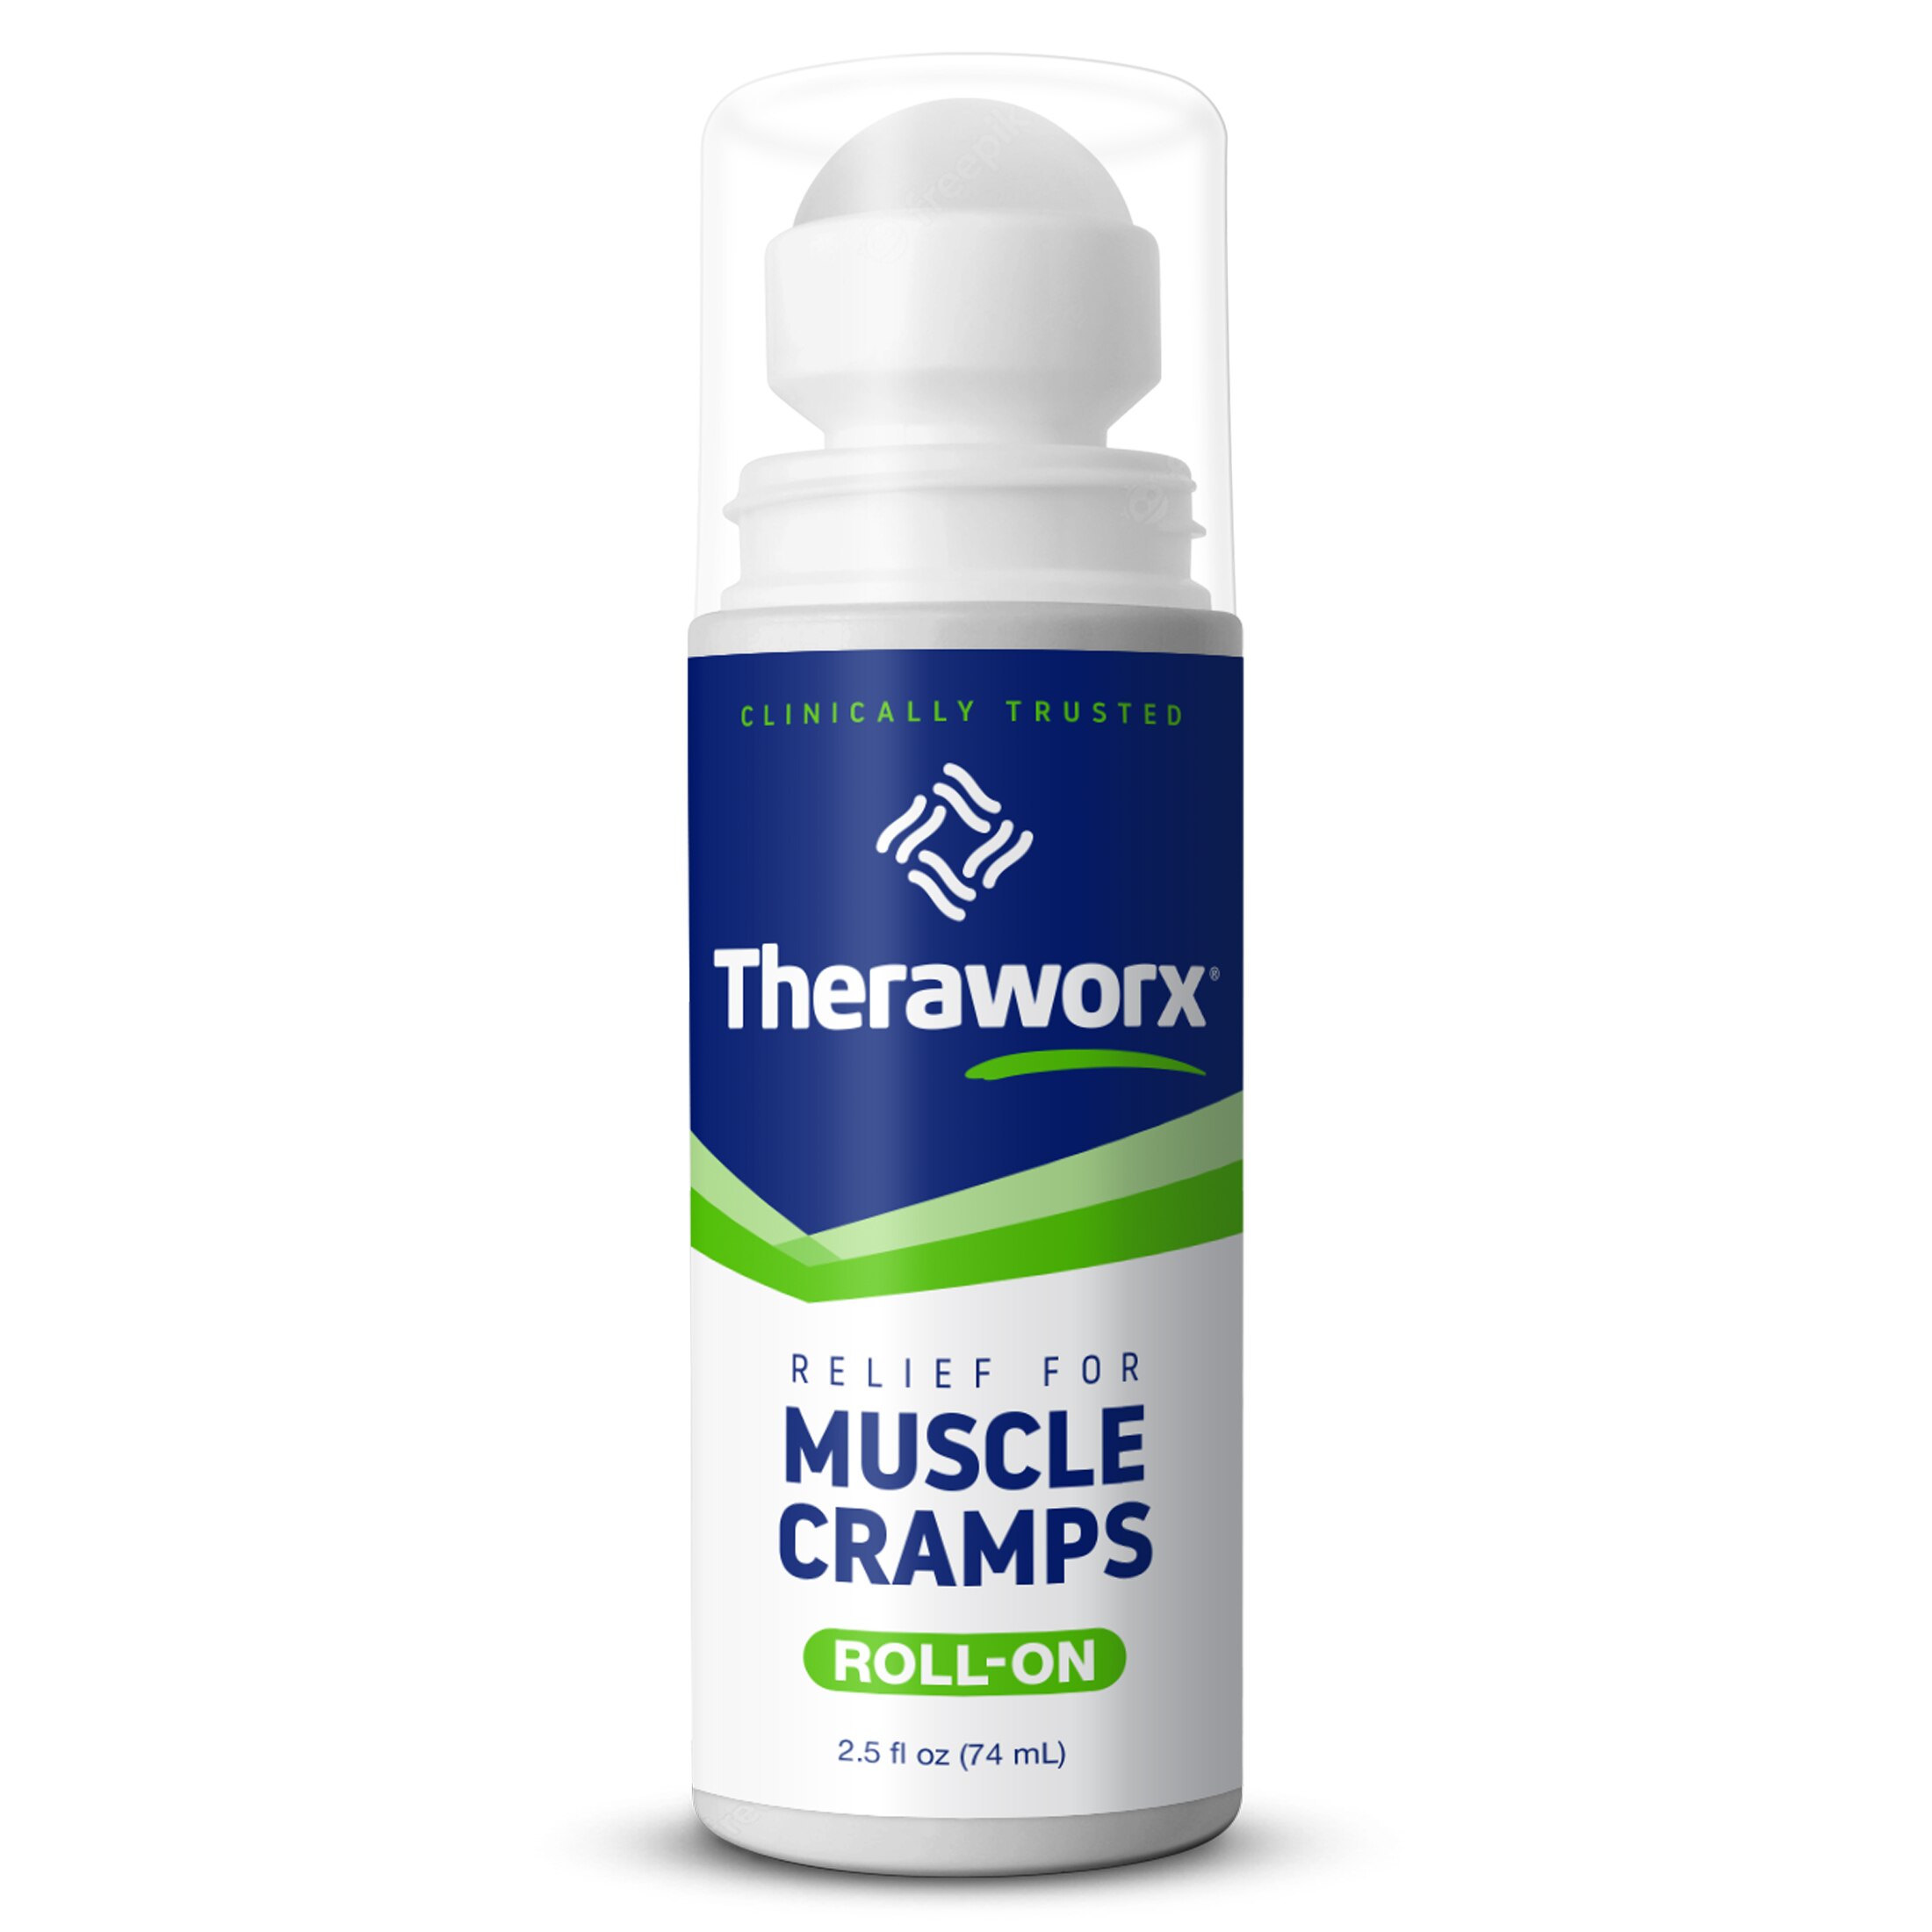 Theraworx Muscle Cramp Roll-On